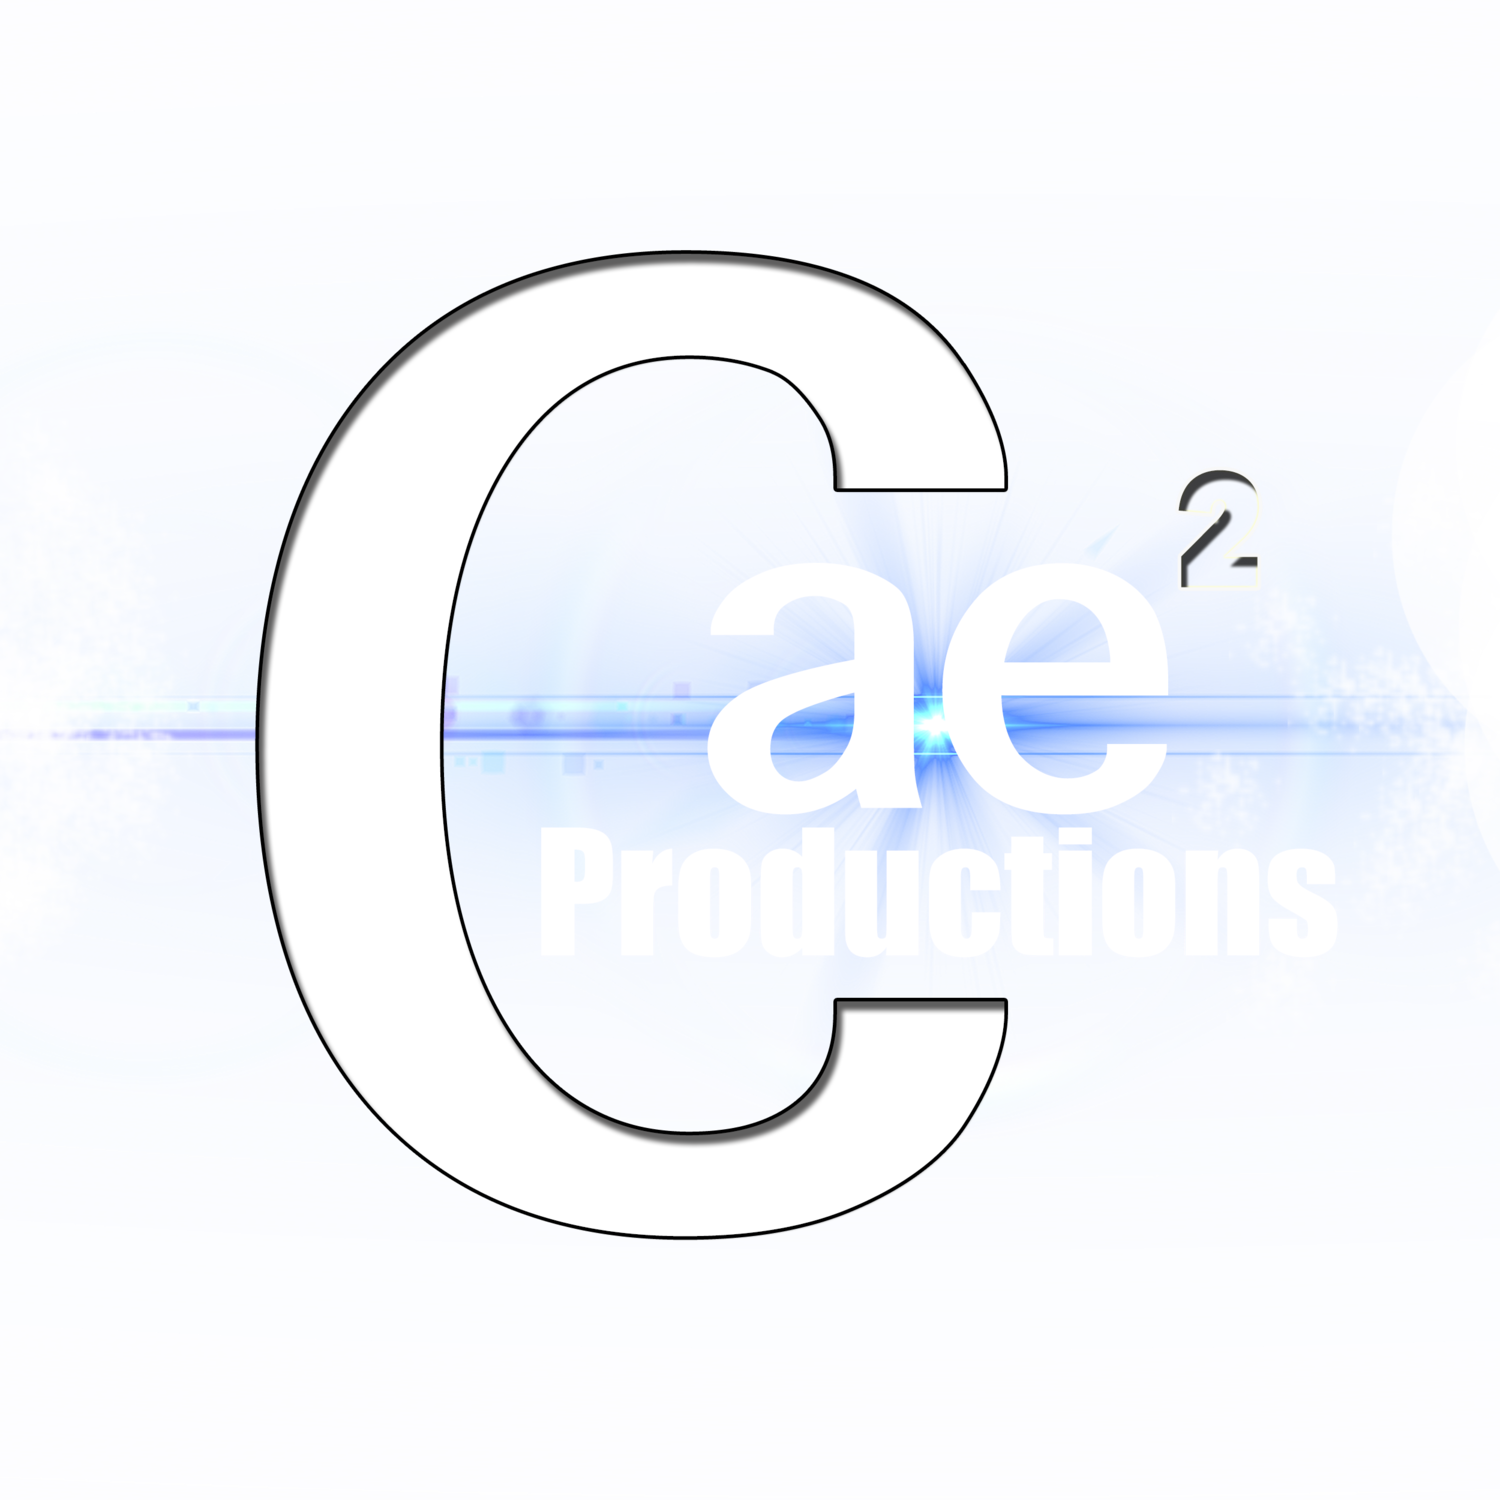 CAE2 Productions